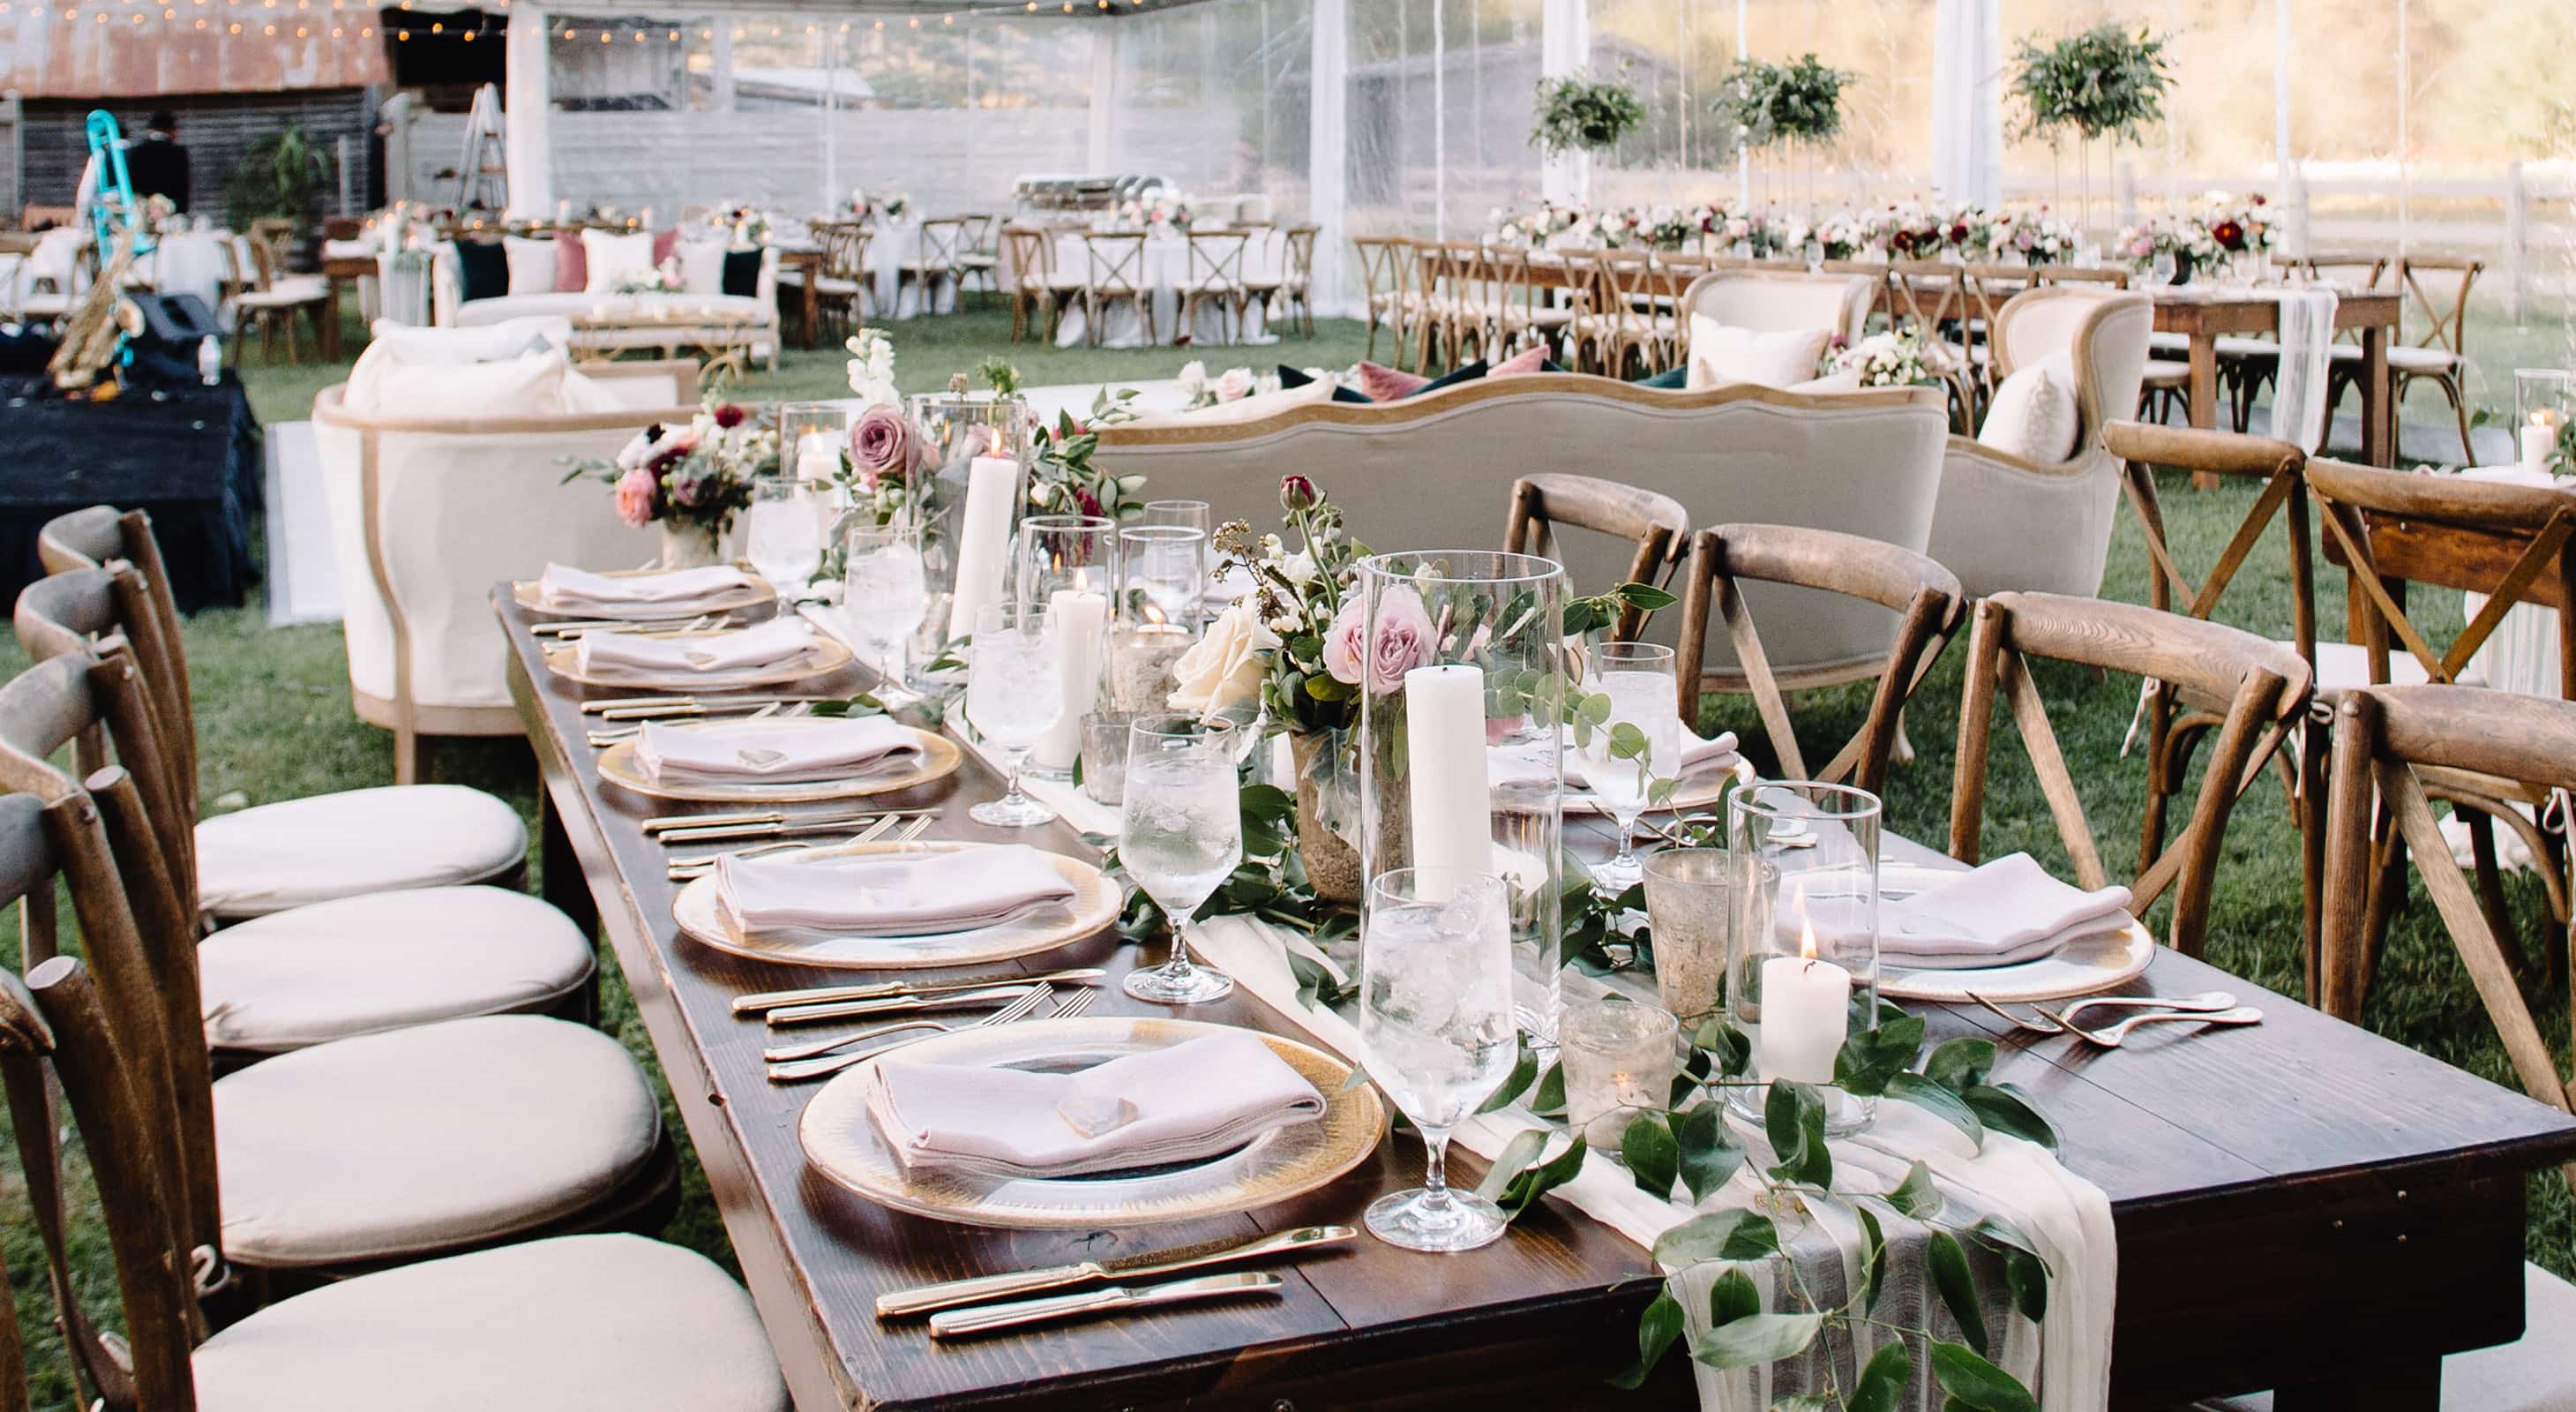 Table set up with elegant decorations and plates for a wedding